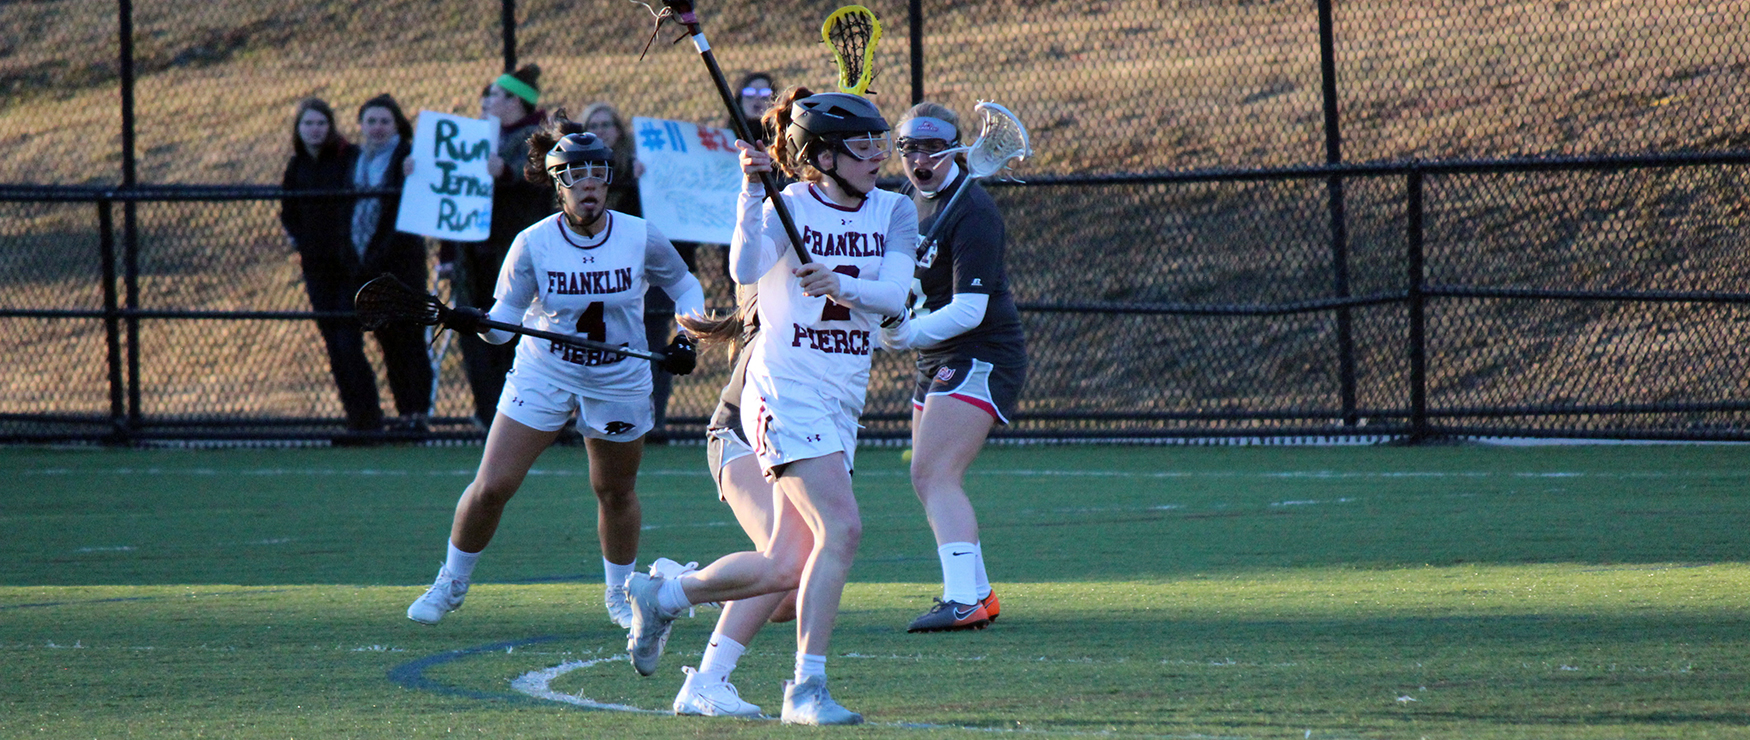 Sweeney Hits Milestone, Women’s Lacrosse Unable to Erase Early Deficit in 18-14 Loss at SNHU